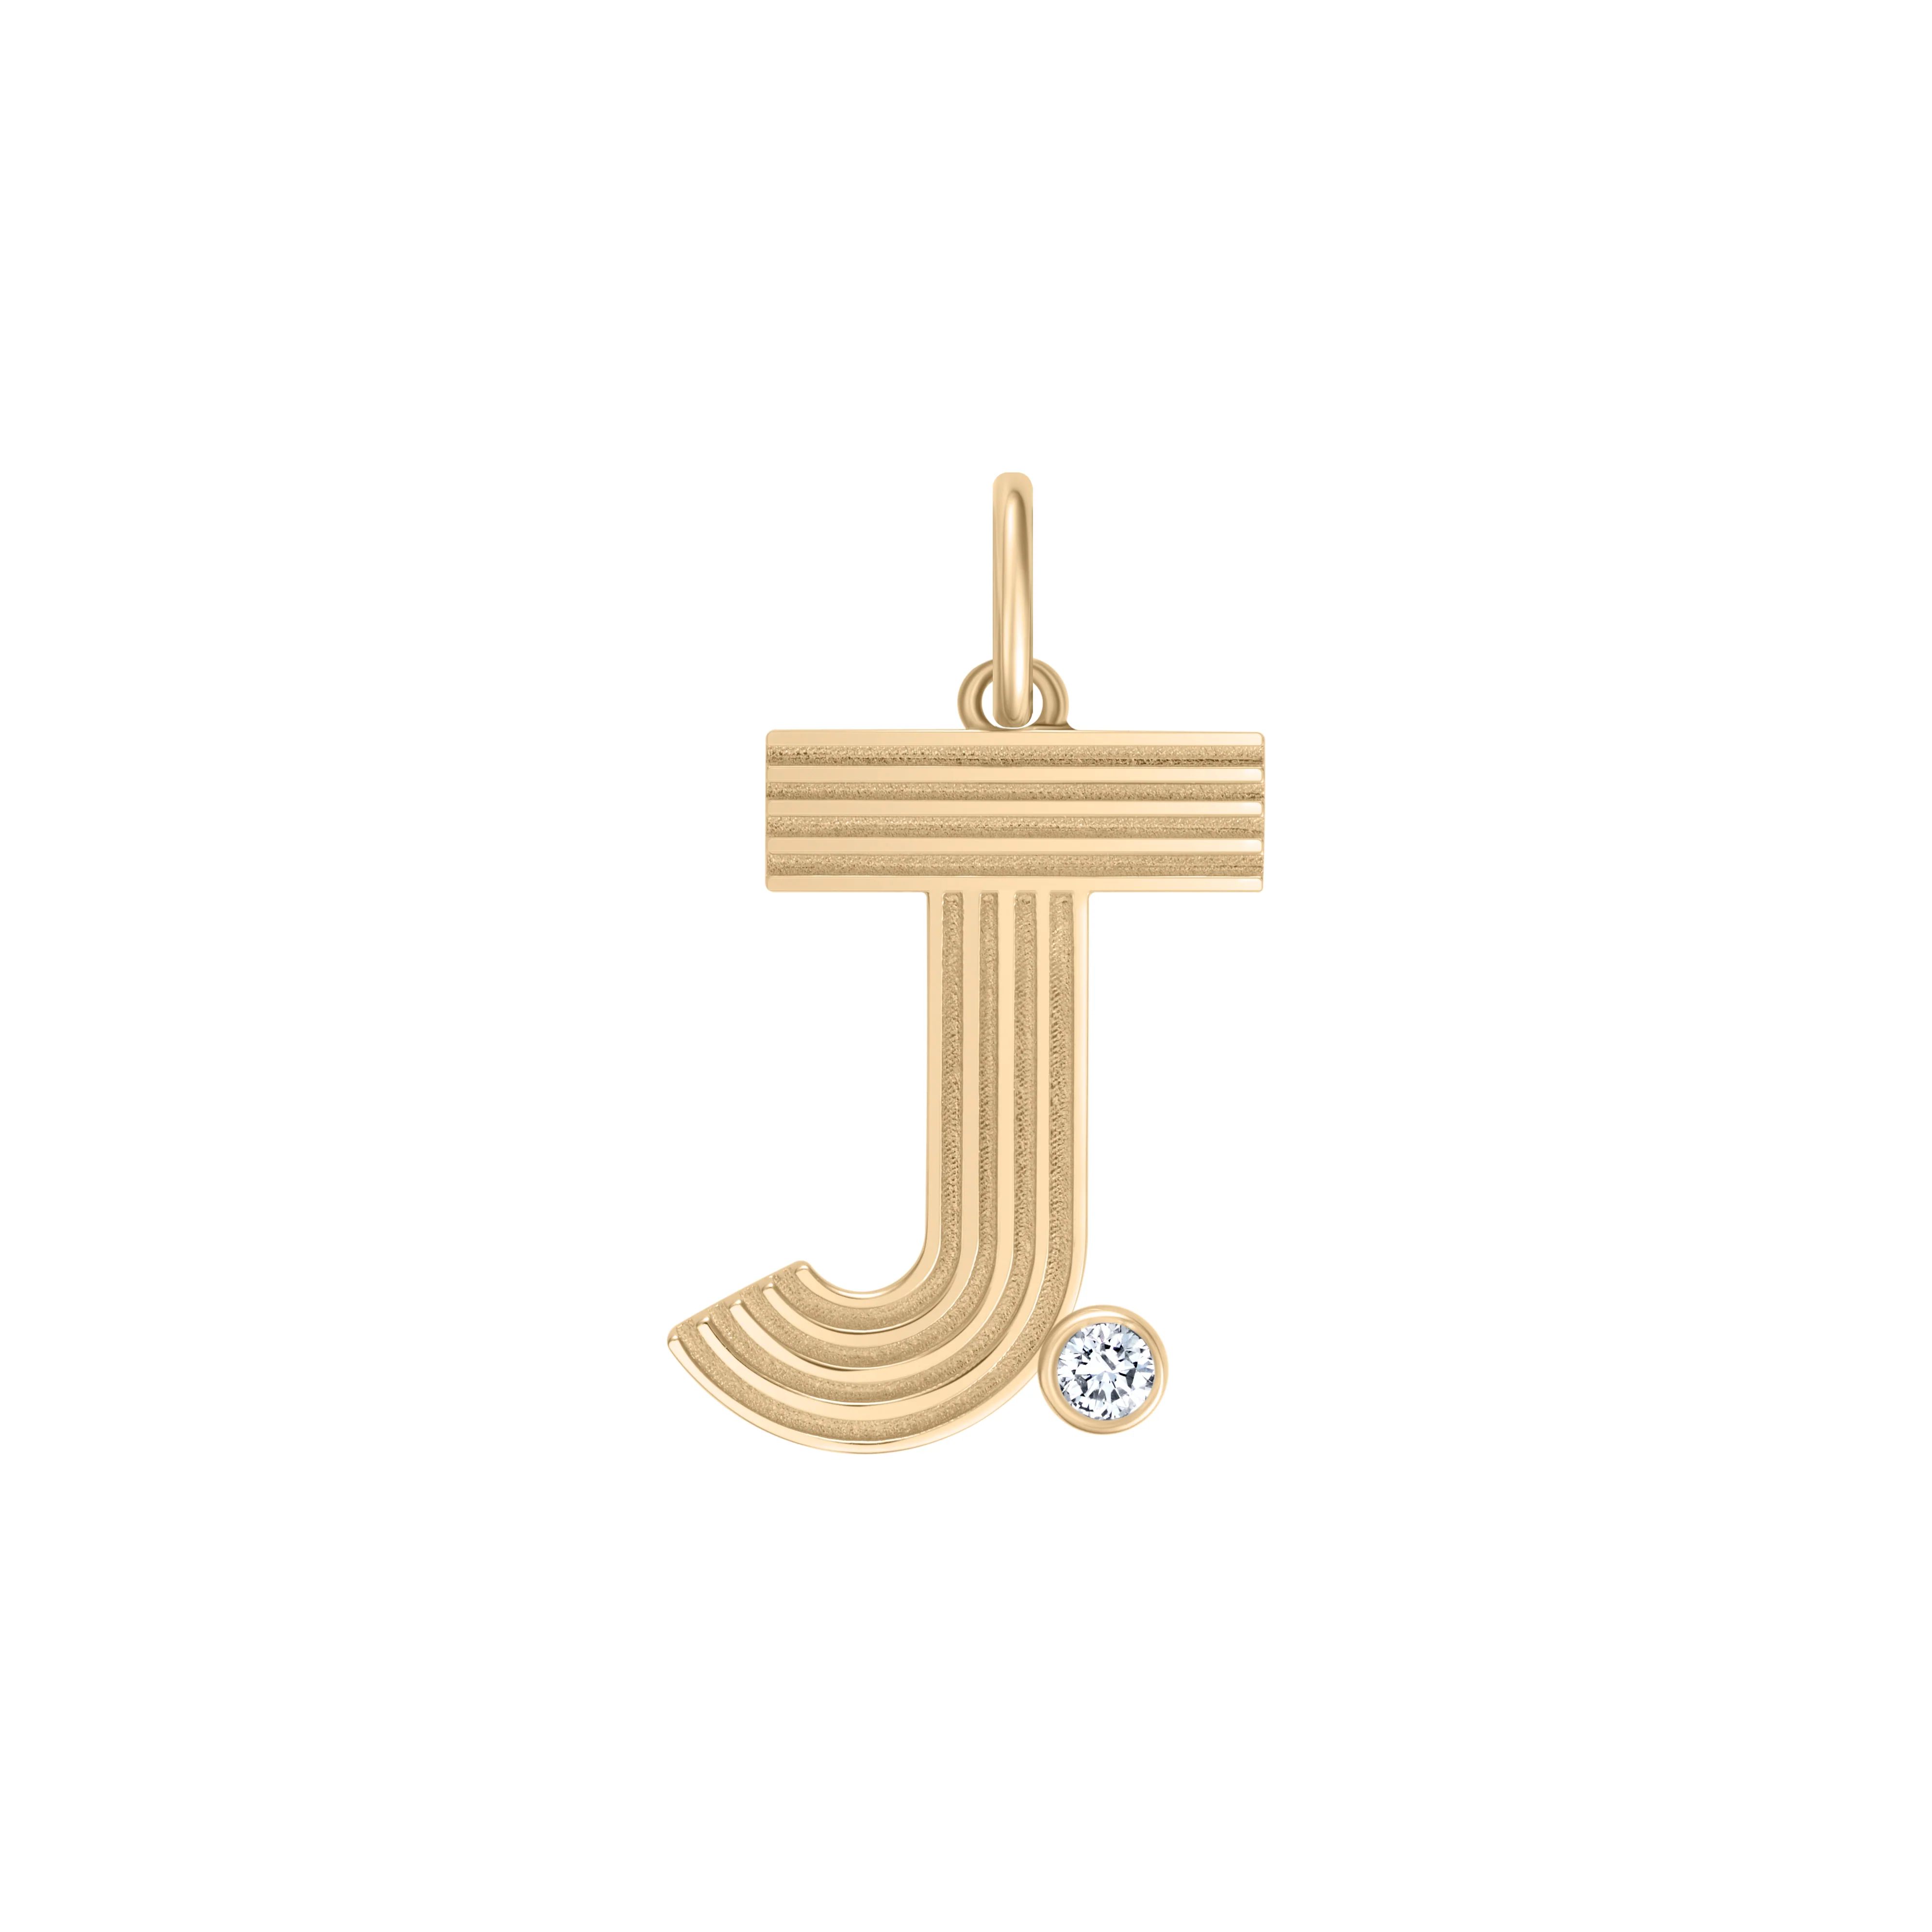 Large Retro Fluted Letter Charm with Stone Accent | Lola James Jewelry